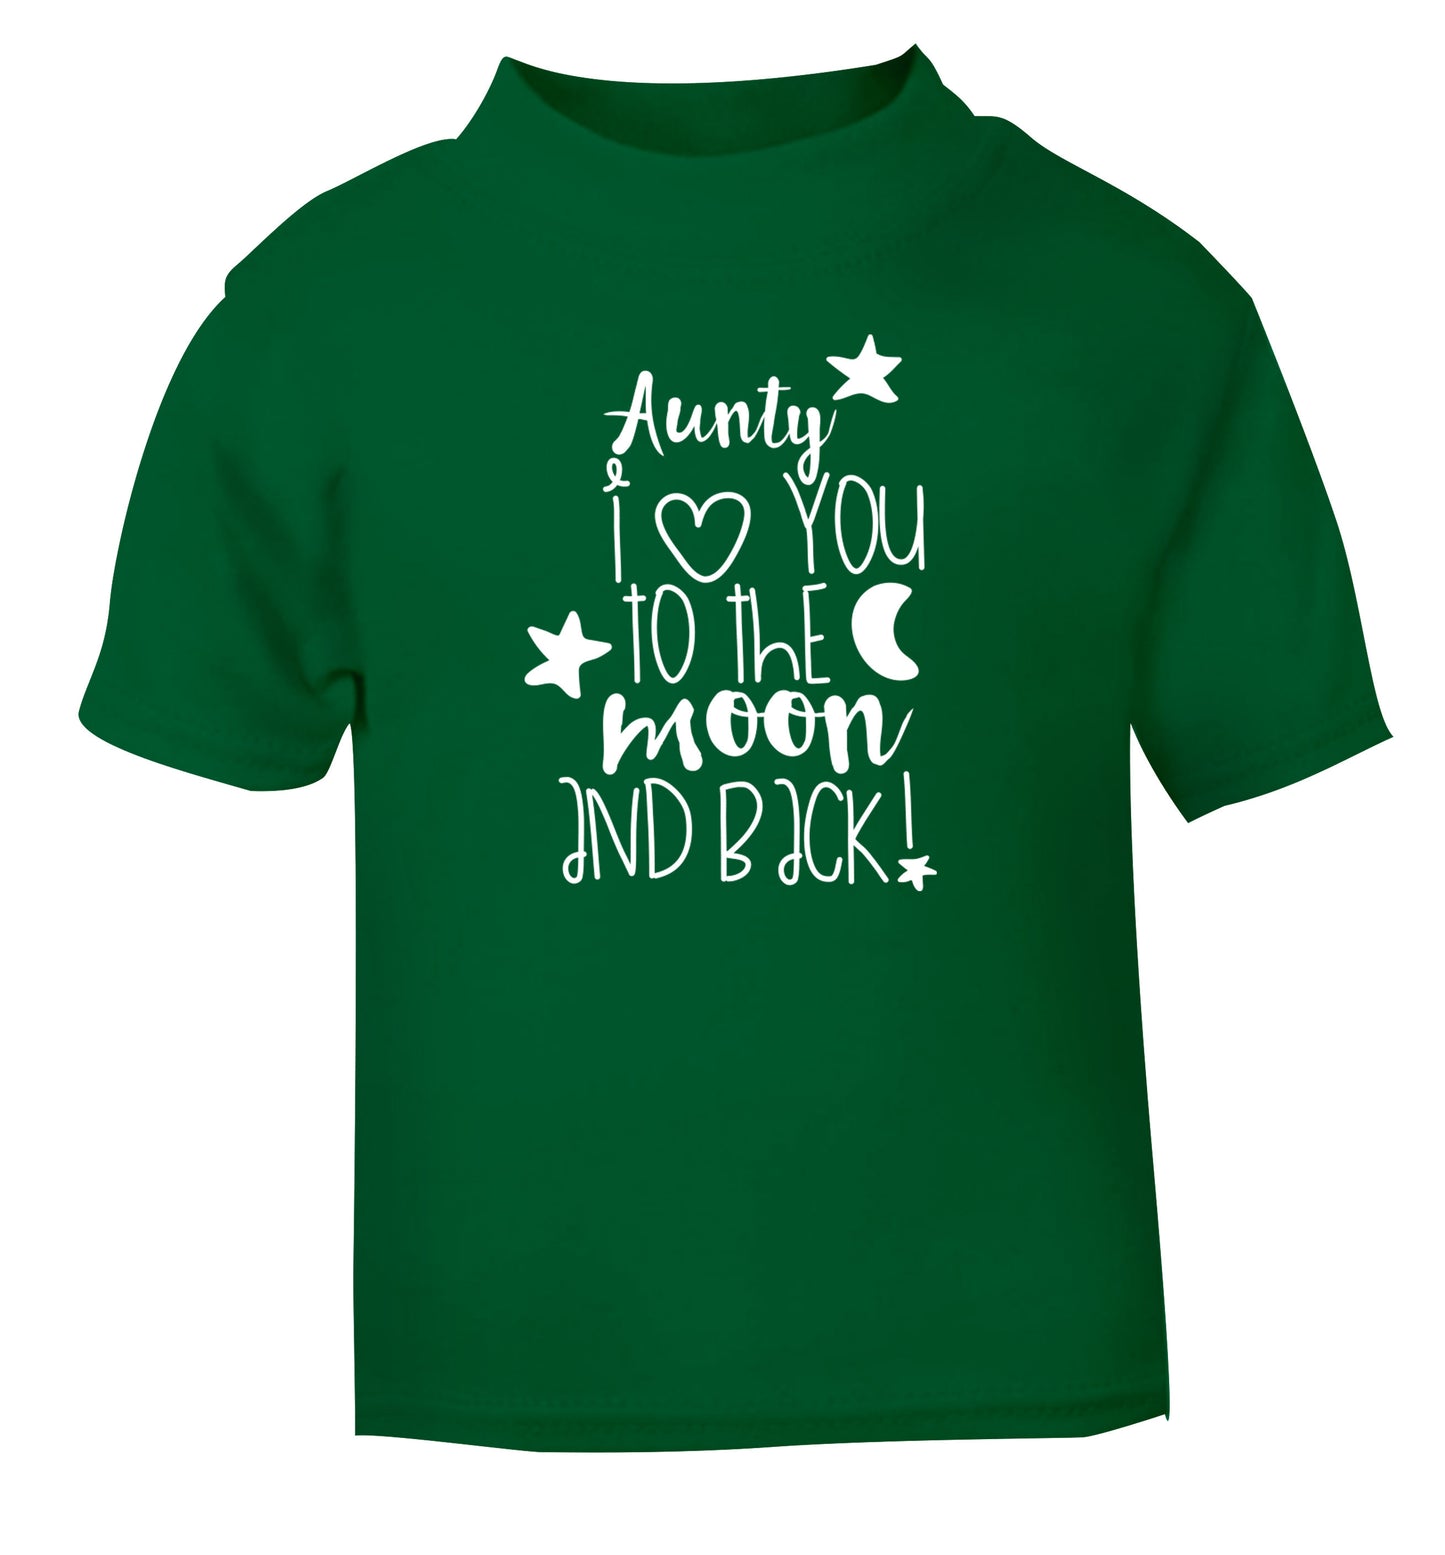 Aunty I love you to the moon and back green Baby Toddler Tshirt 2 Years